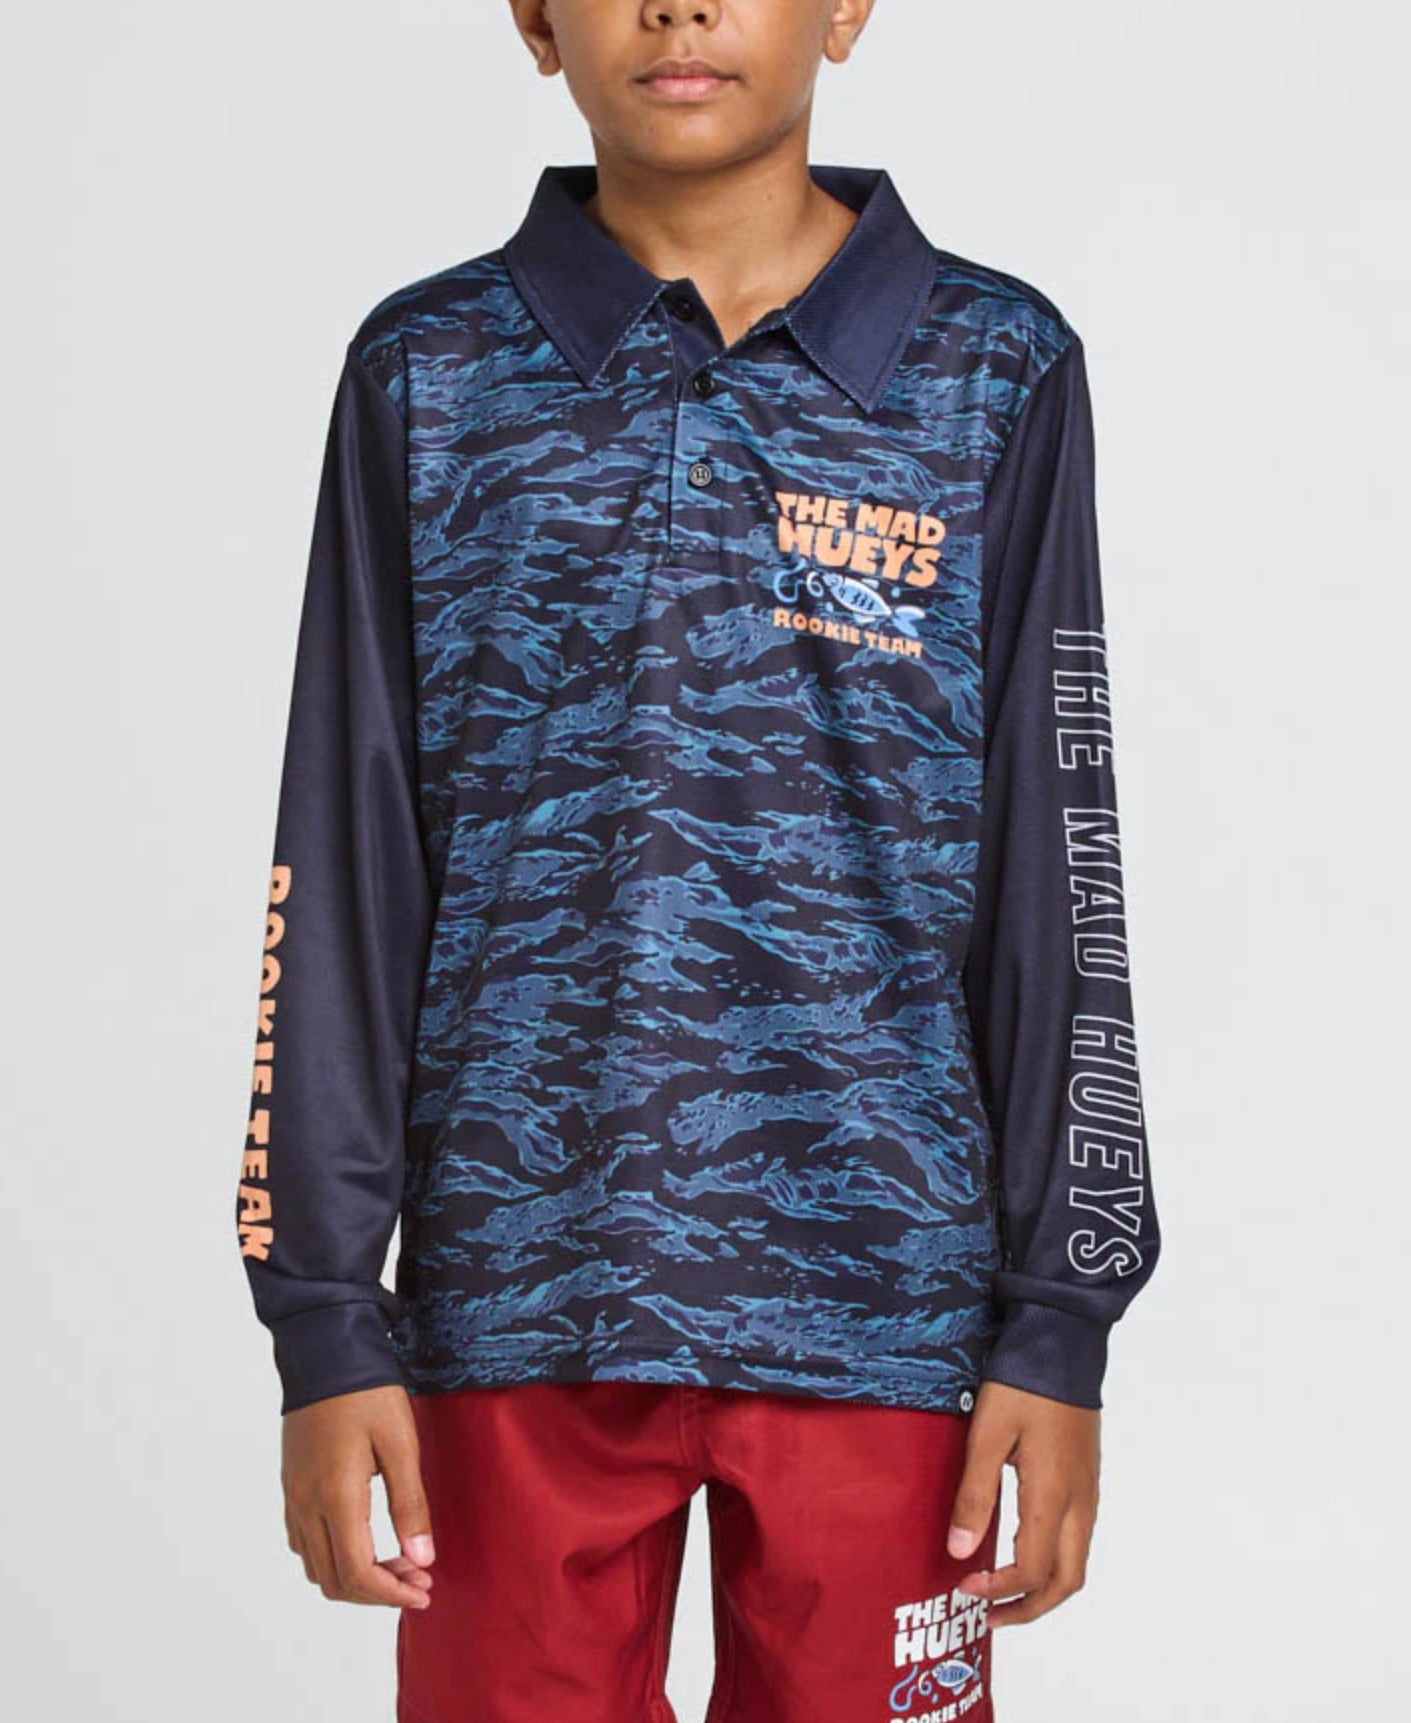 THE MAD HUEYS ROOKIE TEAM / YOUTH FISHING JERSEY – Quarryman Surf